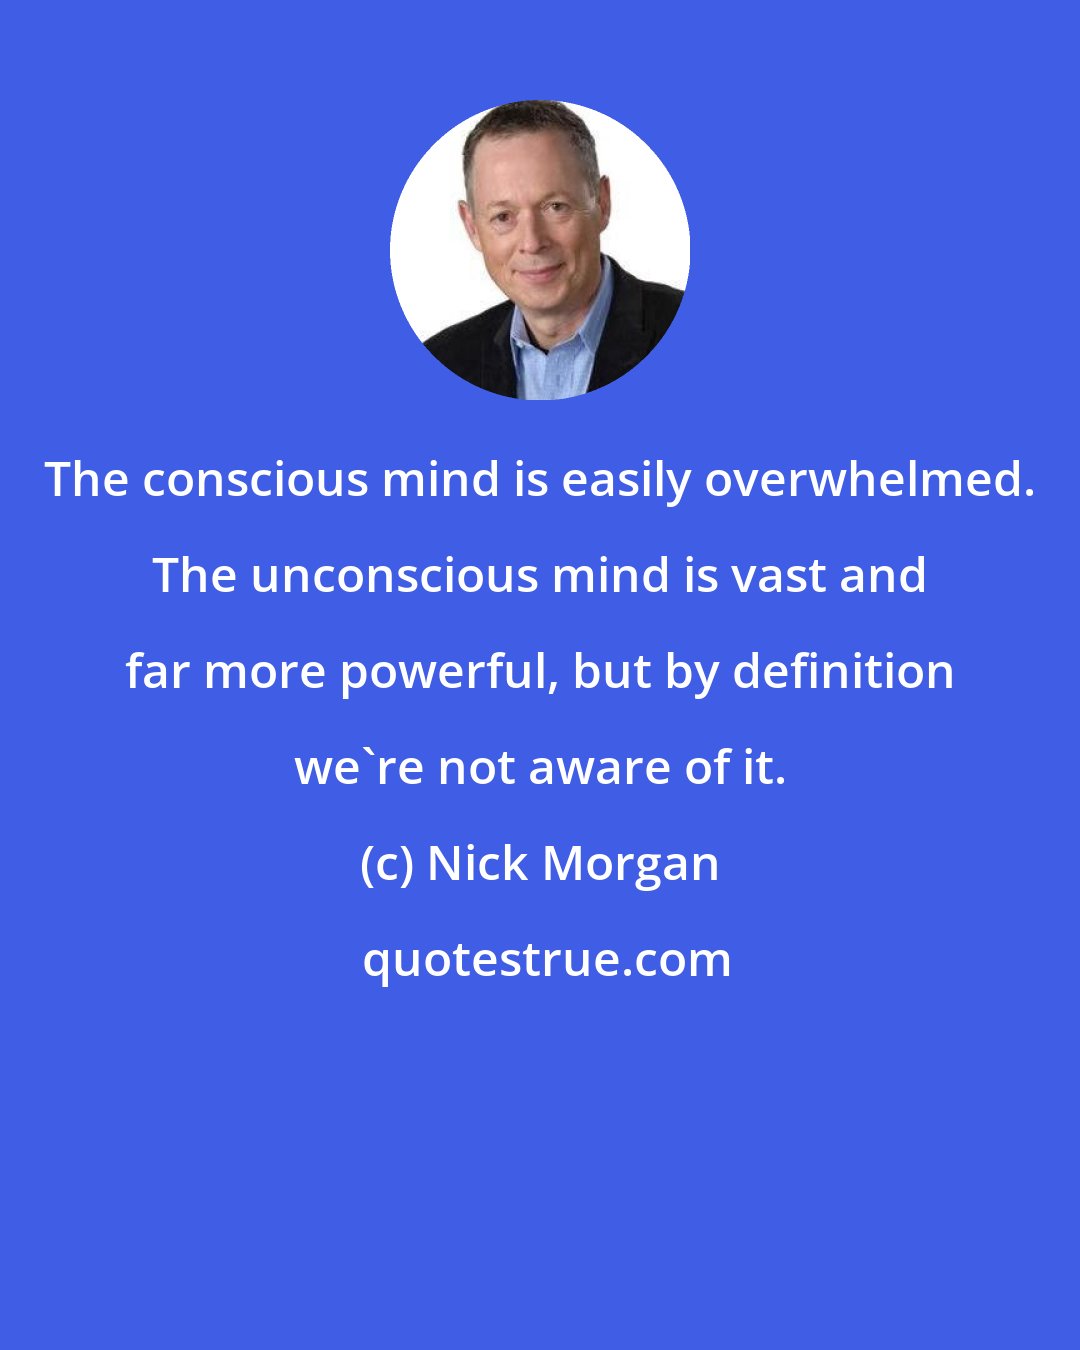 Nick Morgan: The conscious mind is easily overwhelmed. The unconscious mind is vast and far more powerful, but by definition we're not aware of it.